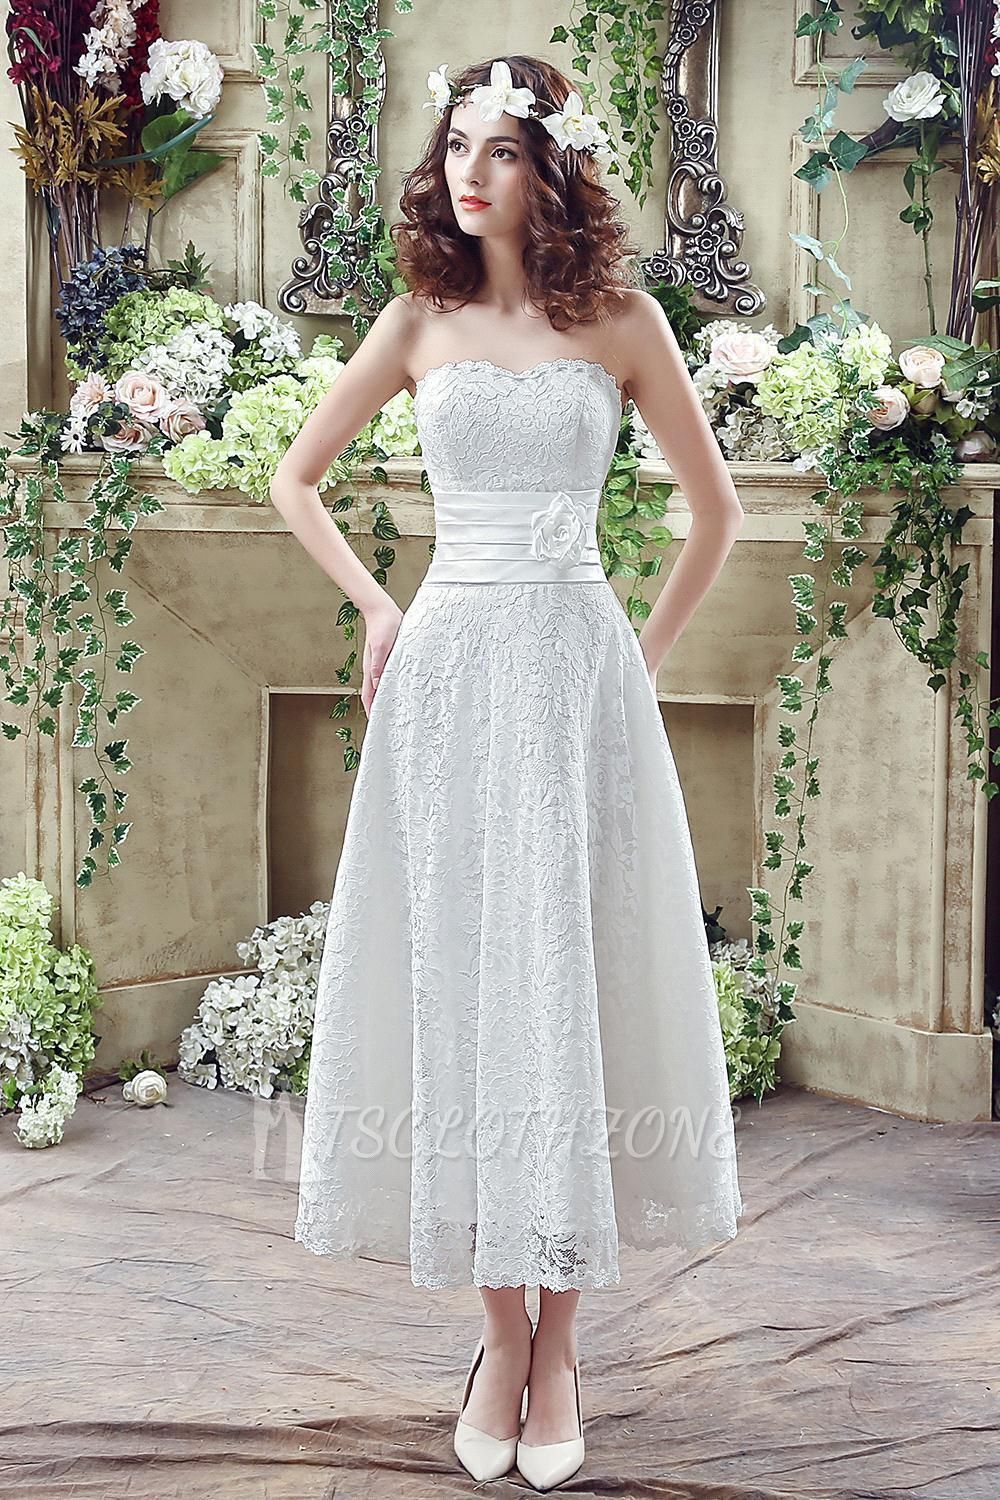 Elegant Sweetheart Lace Wedding Dress Ankle Length Empire Bridal Gown